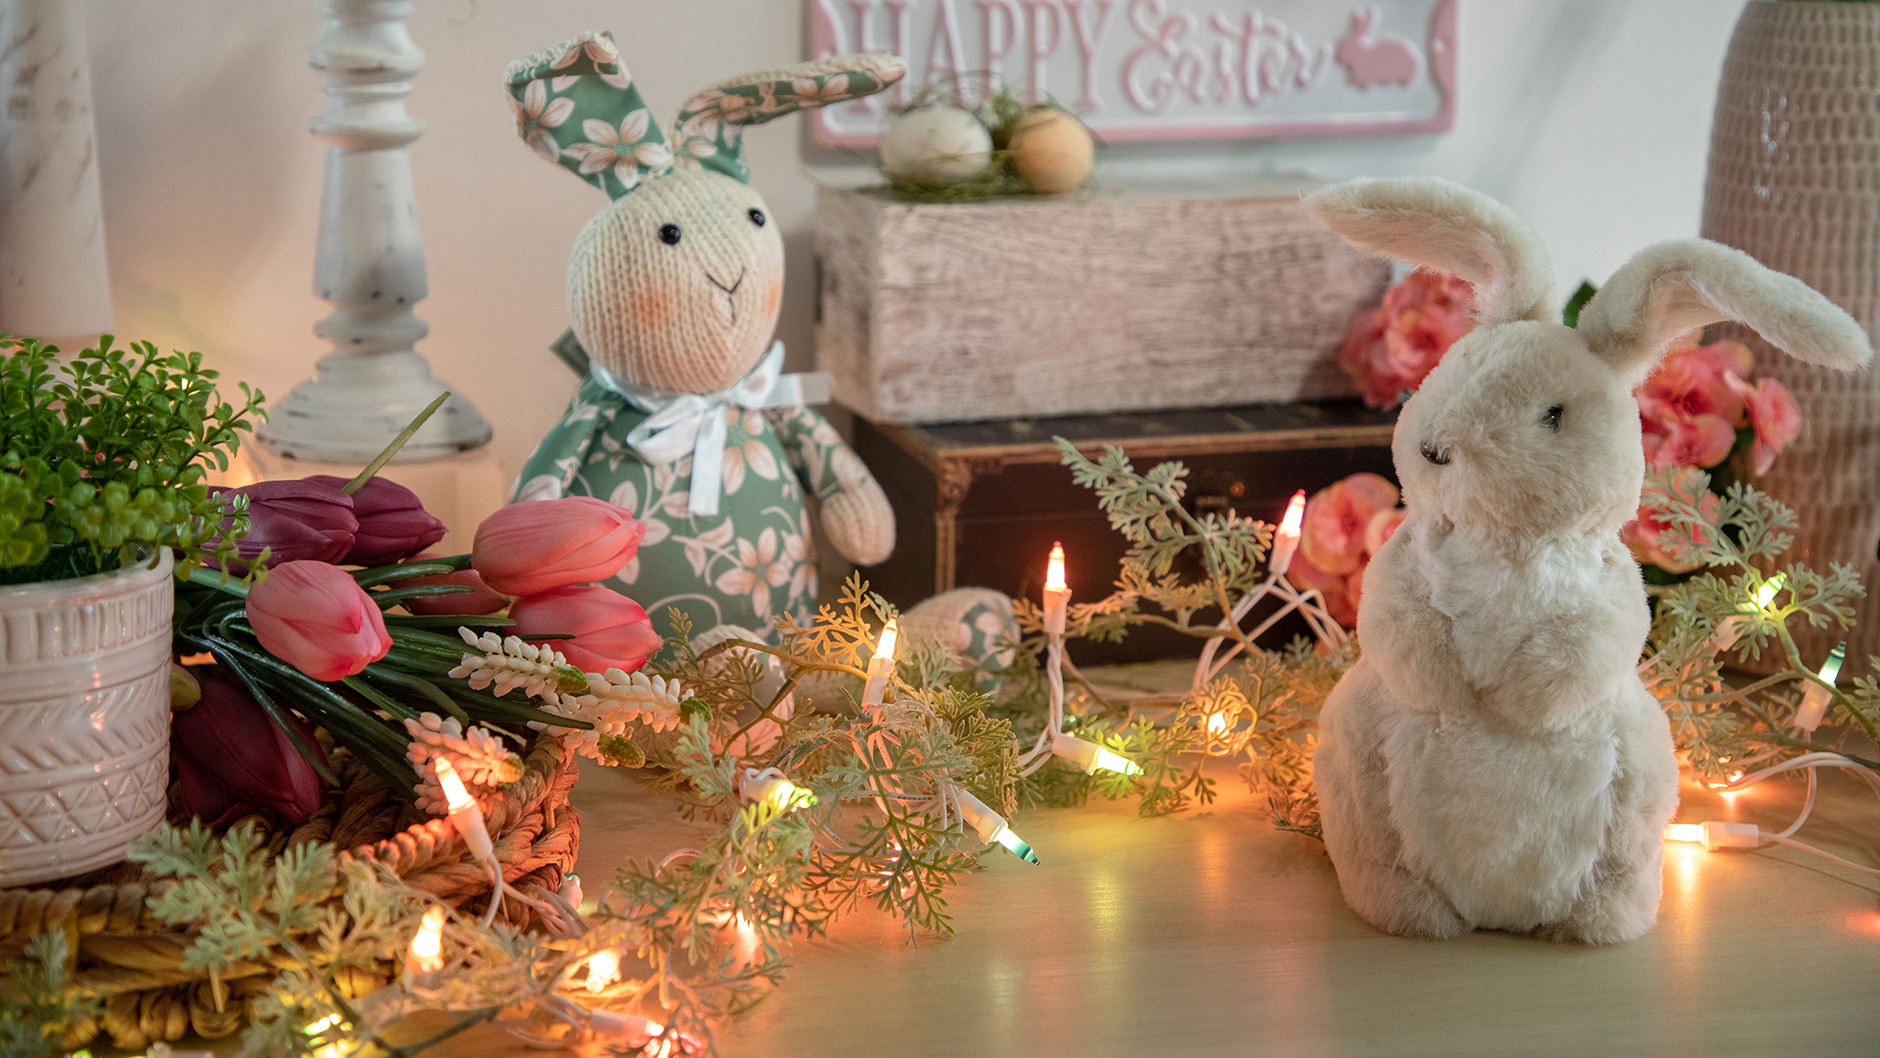 tabletop Easter display featuring plush bunnies, artificial greenery and flowers and lighted pastel colored string lights